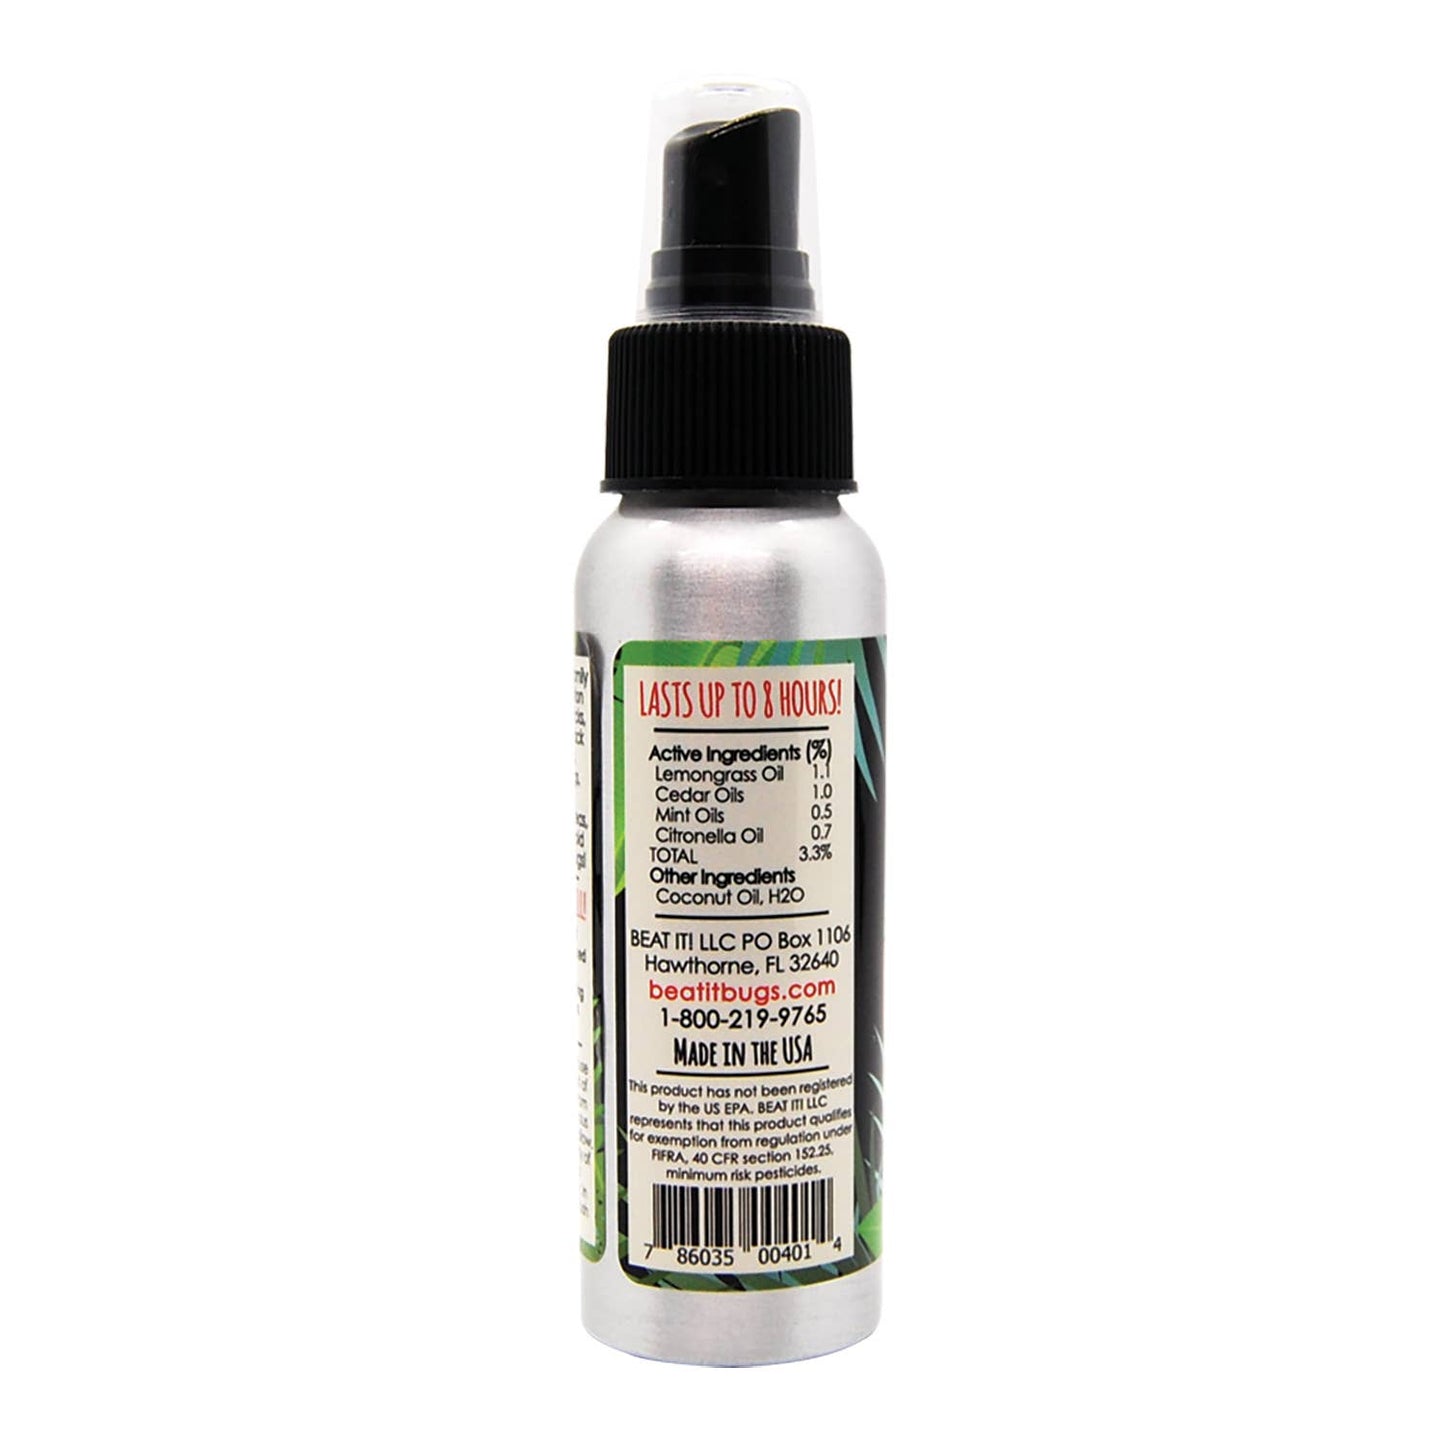 Beat It! All Natural Insect Repellent